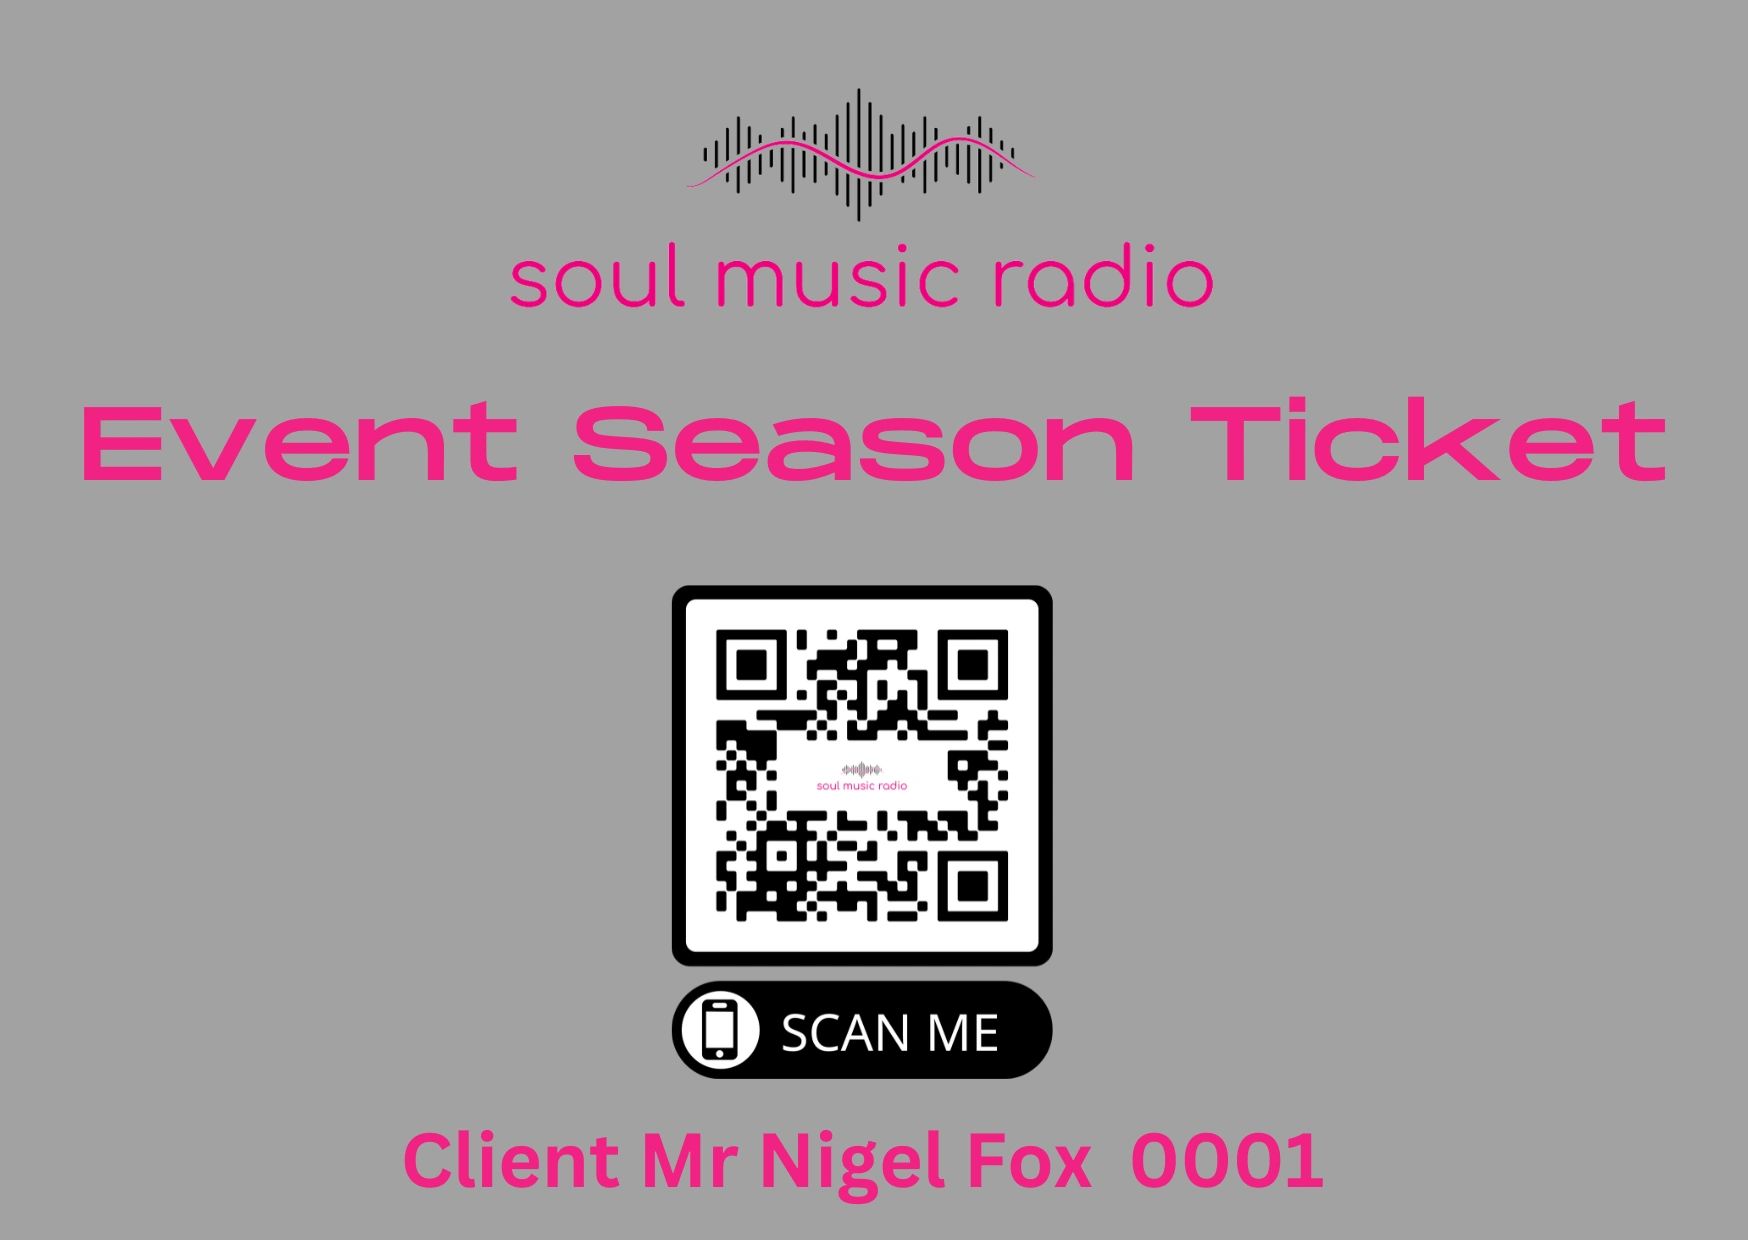 This will give you access & priority booking to all Soul Music Event wristbands including Cyprus Sou